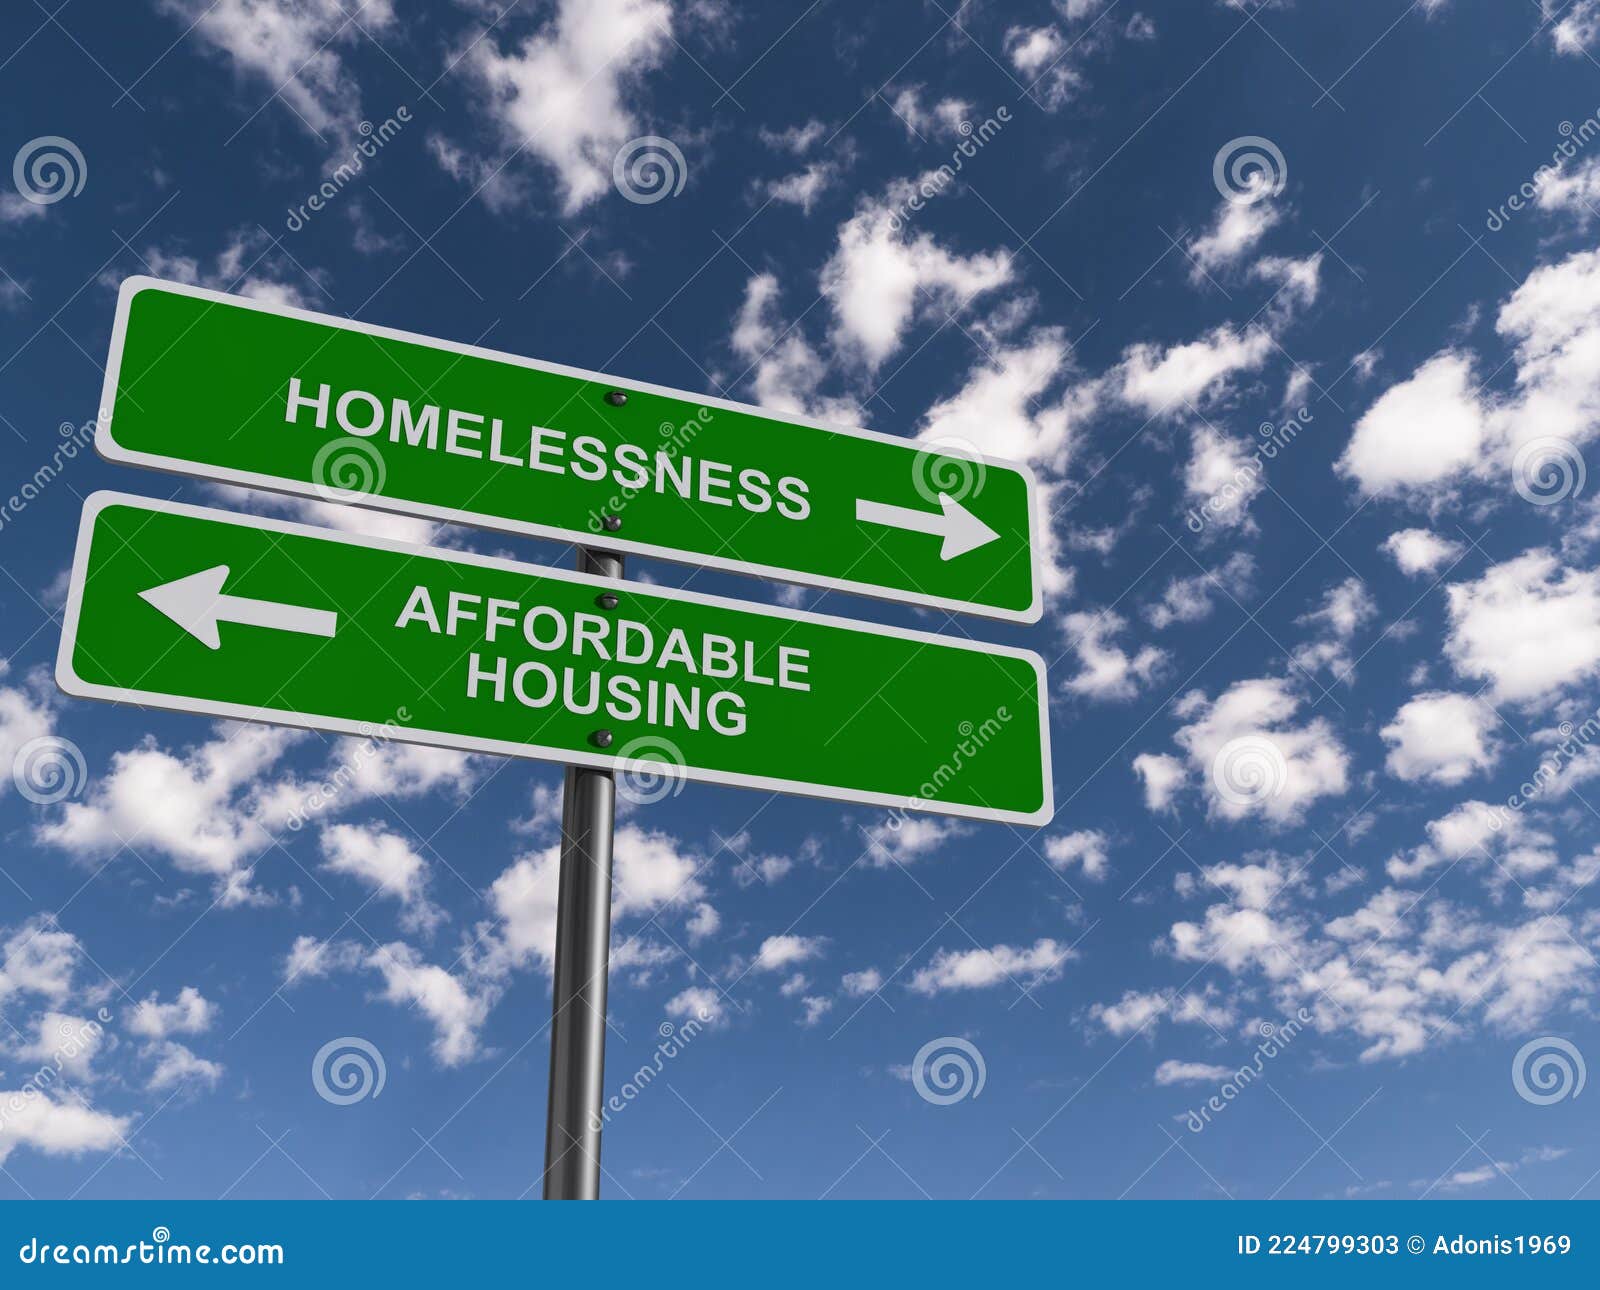 homelessness affordable housing traffic sign